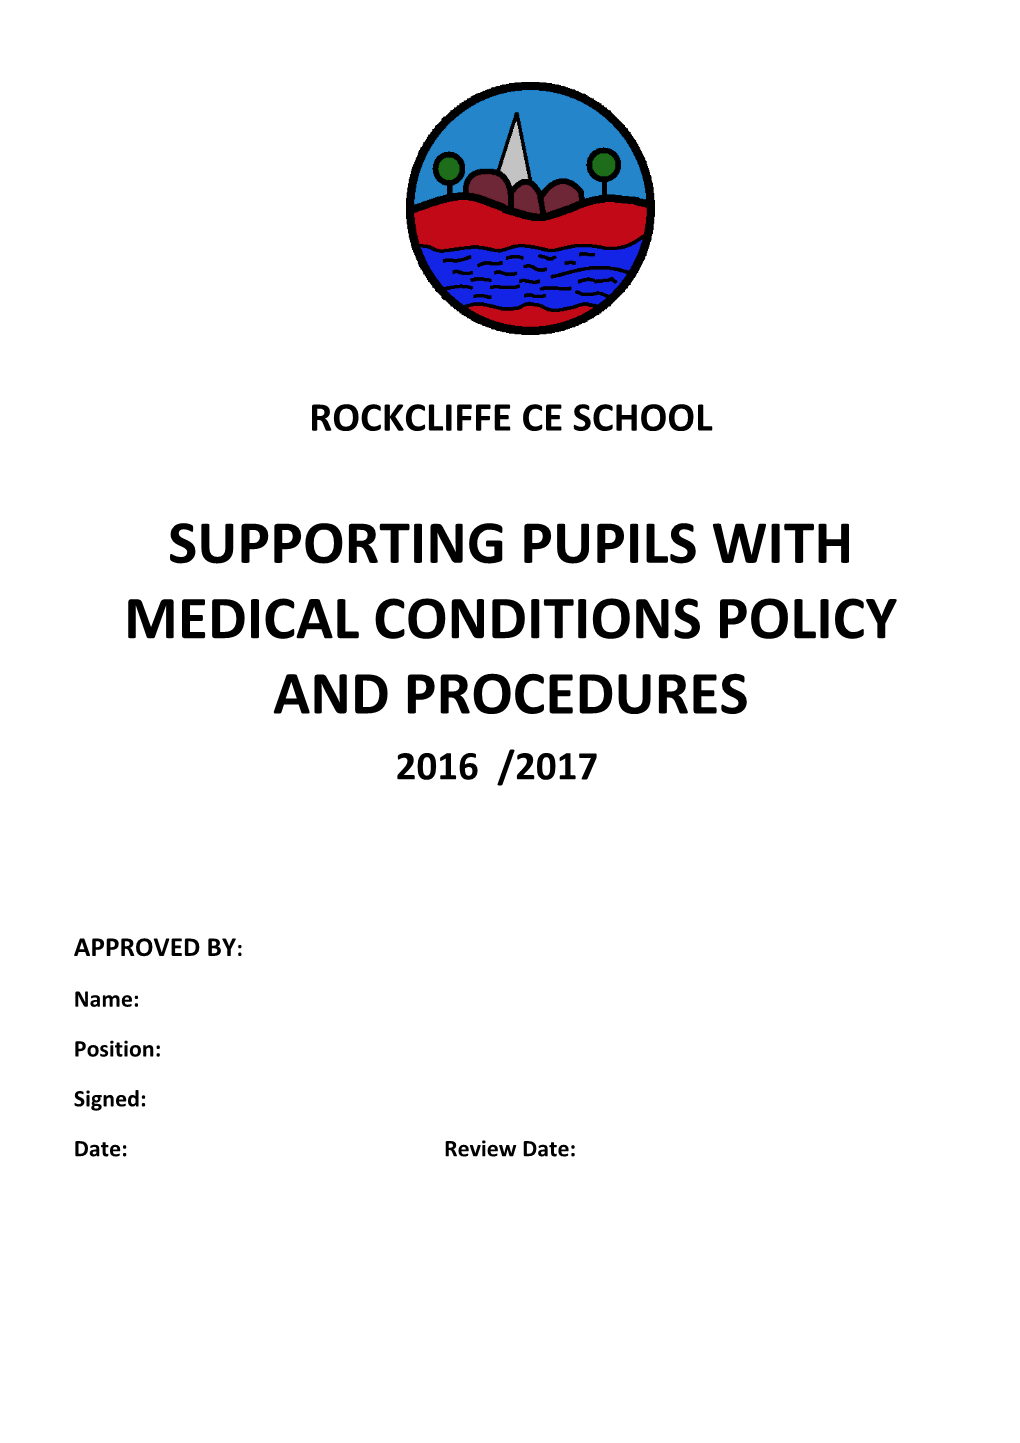 Supporting Pupils with Medical Conditions Policy and Procedures